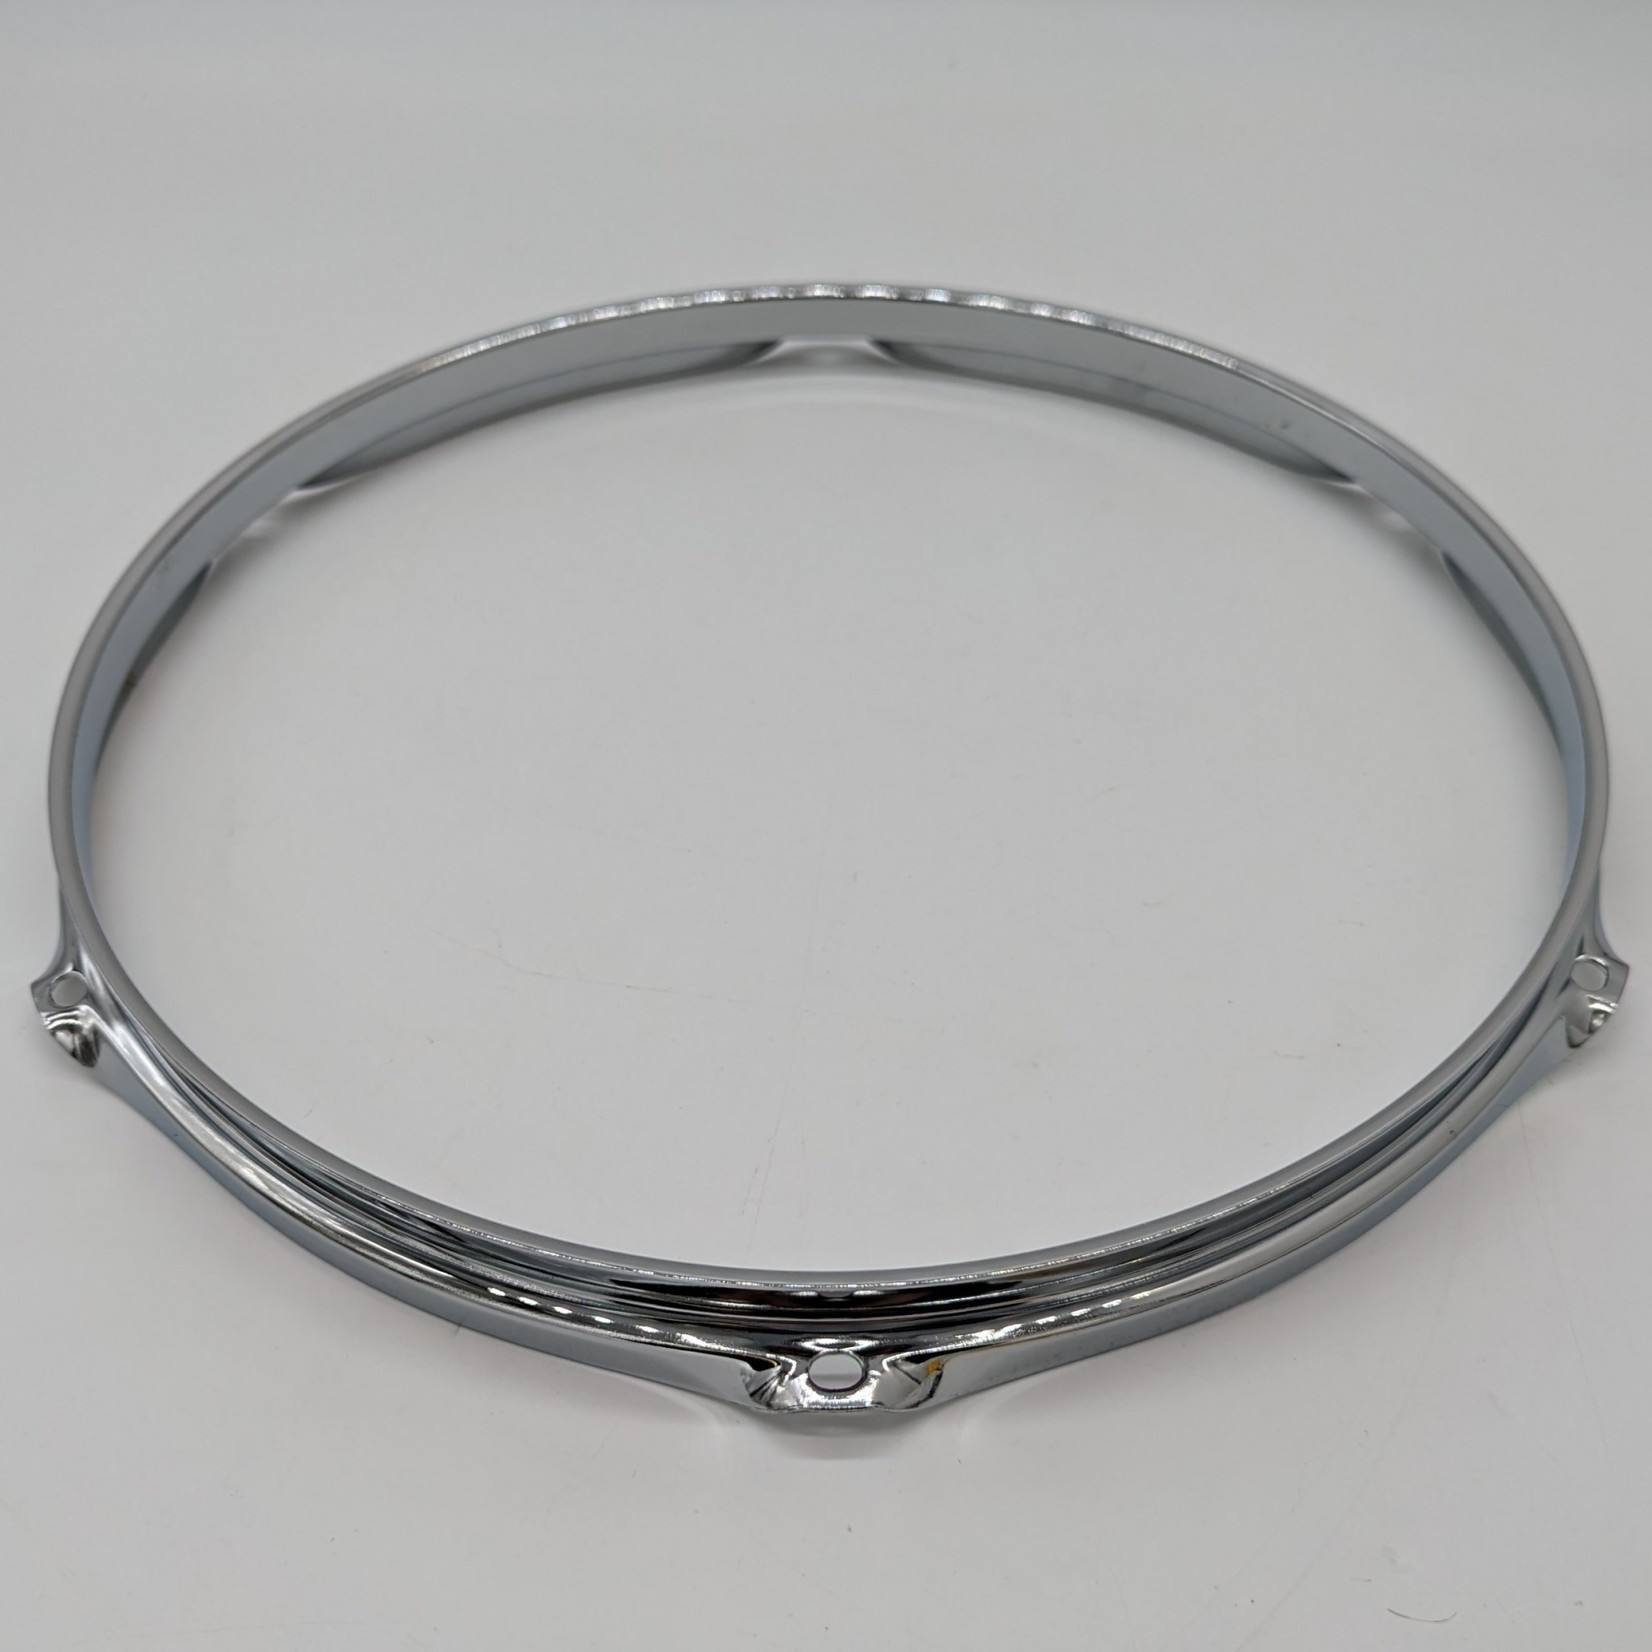 Cardinal Percussion 13" 6-Hole Triple Flanged Hoop (1.6mm)